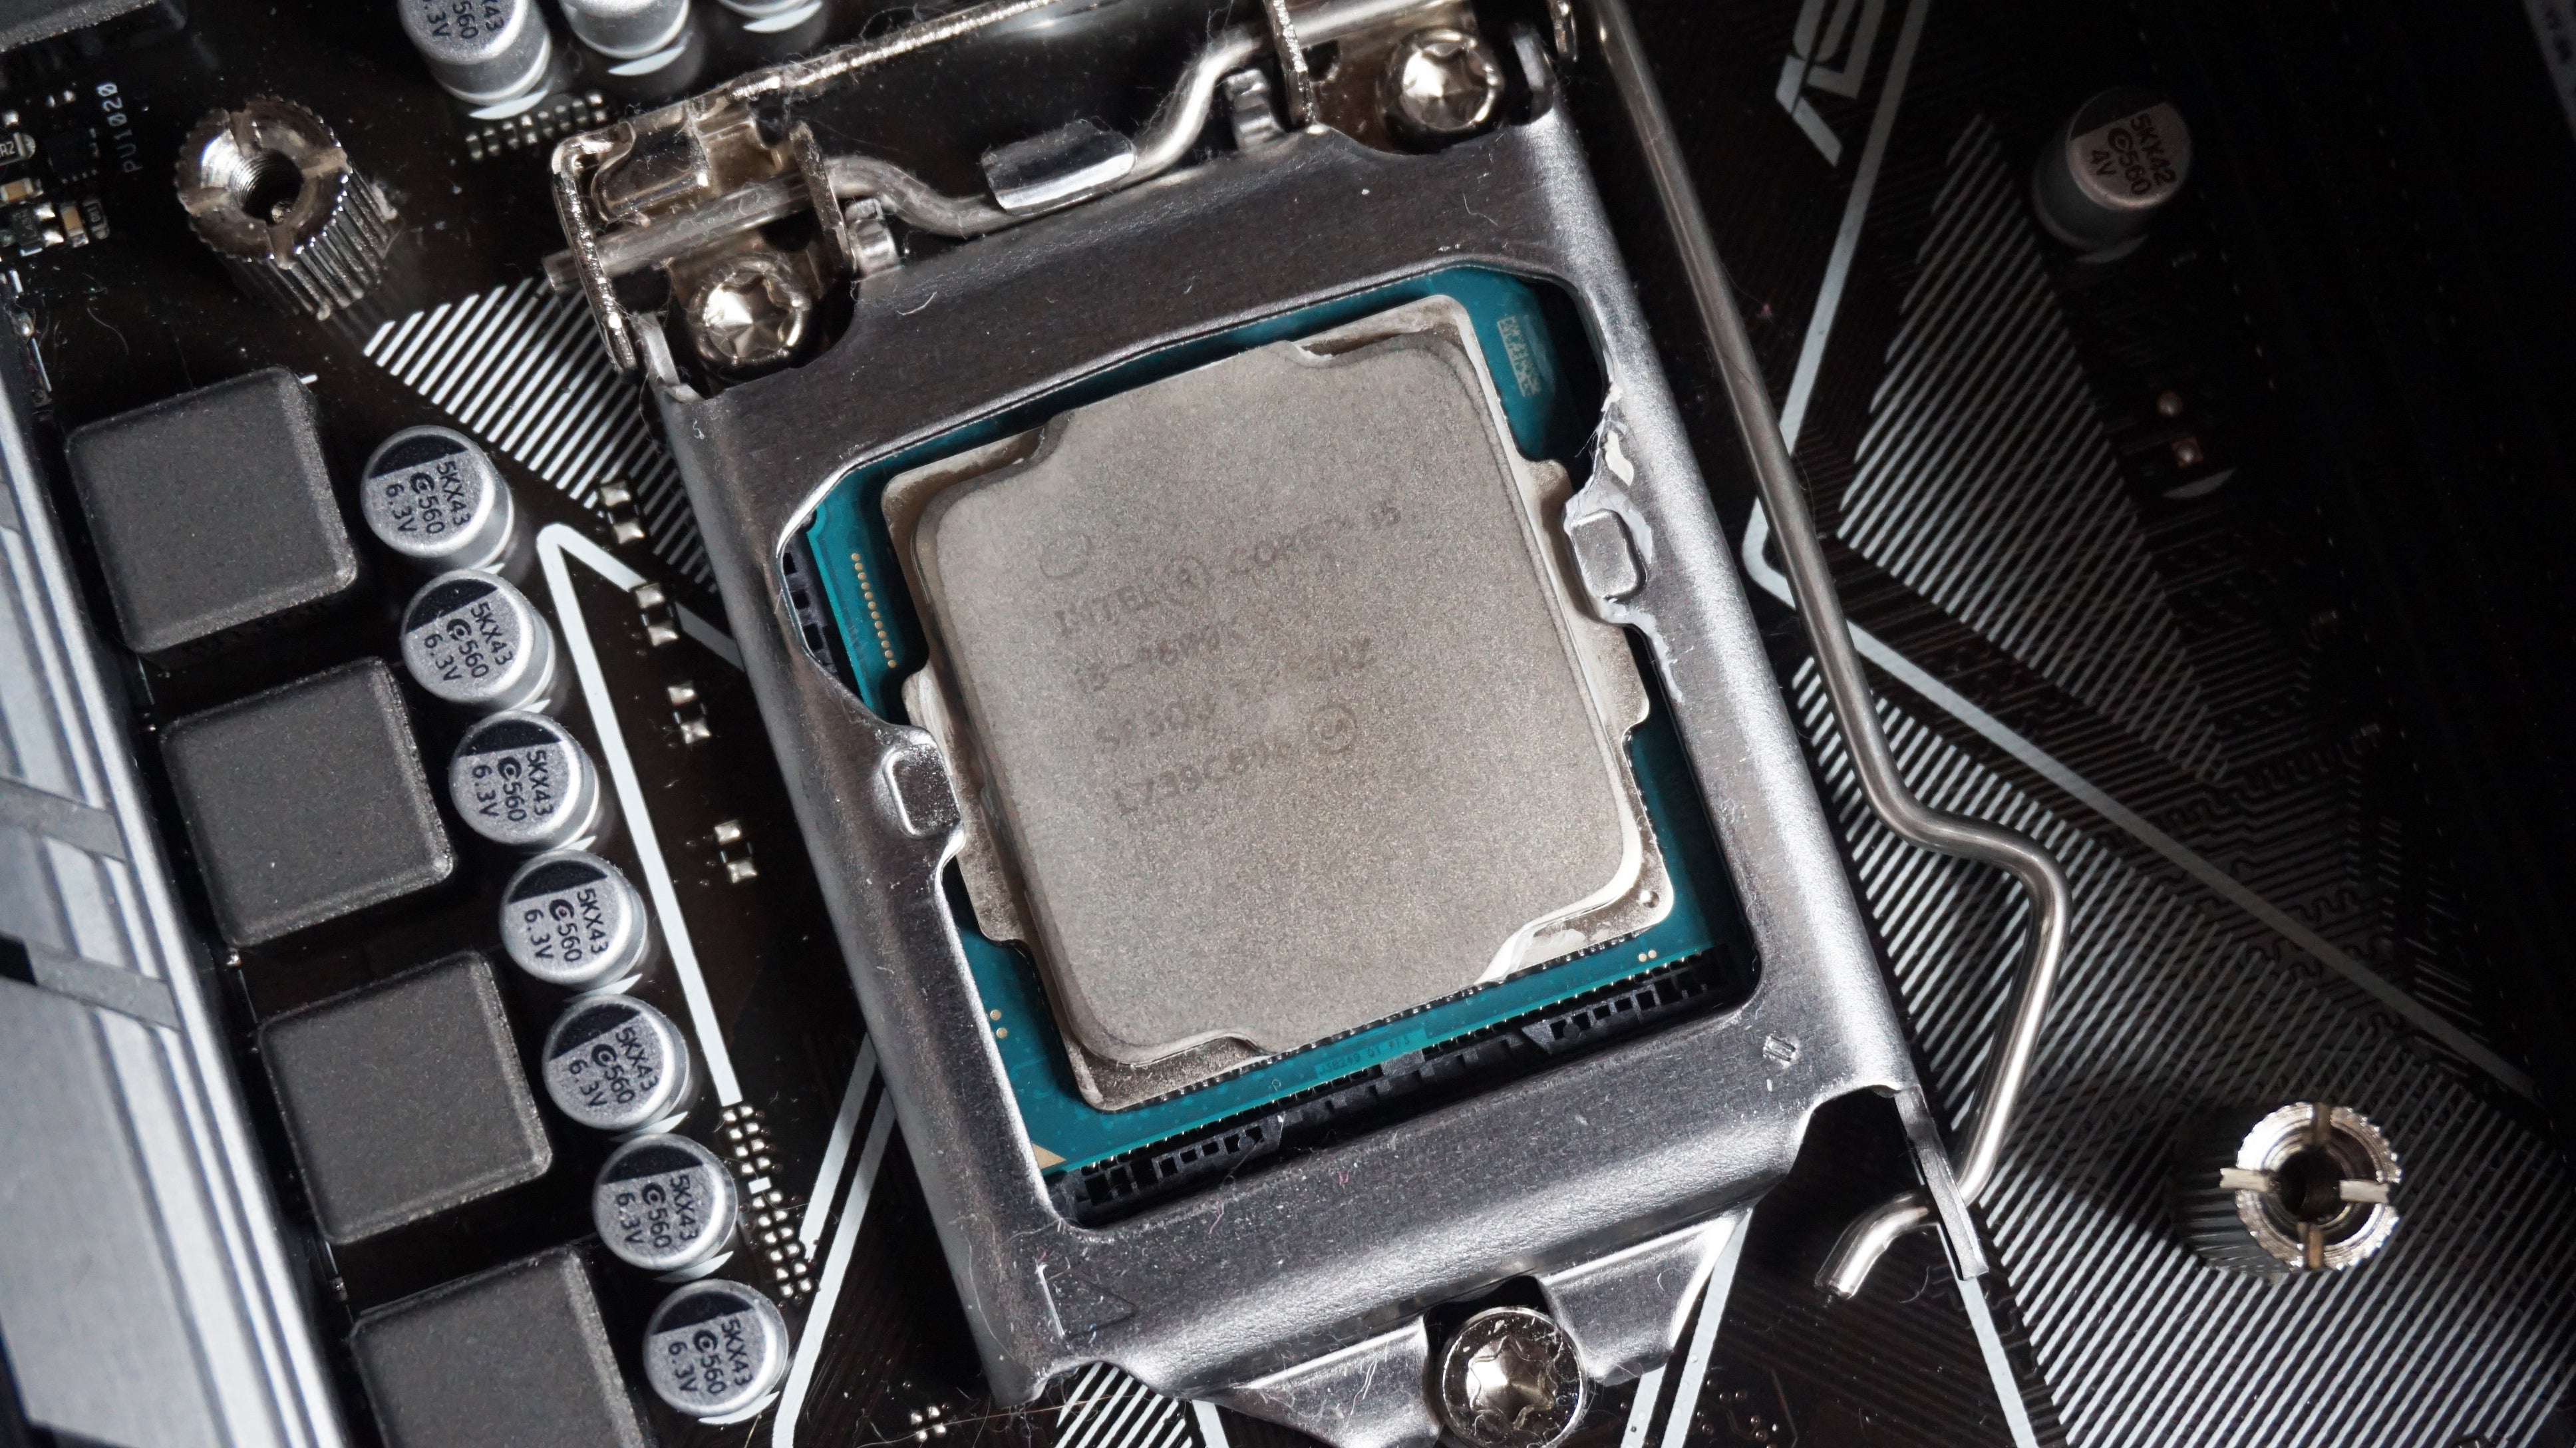 Intel Core i5-8600K review: No longer the best mid-range gaming CPU